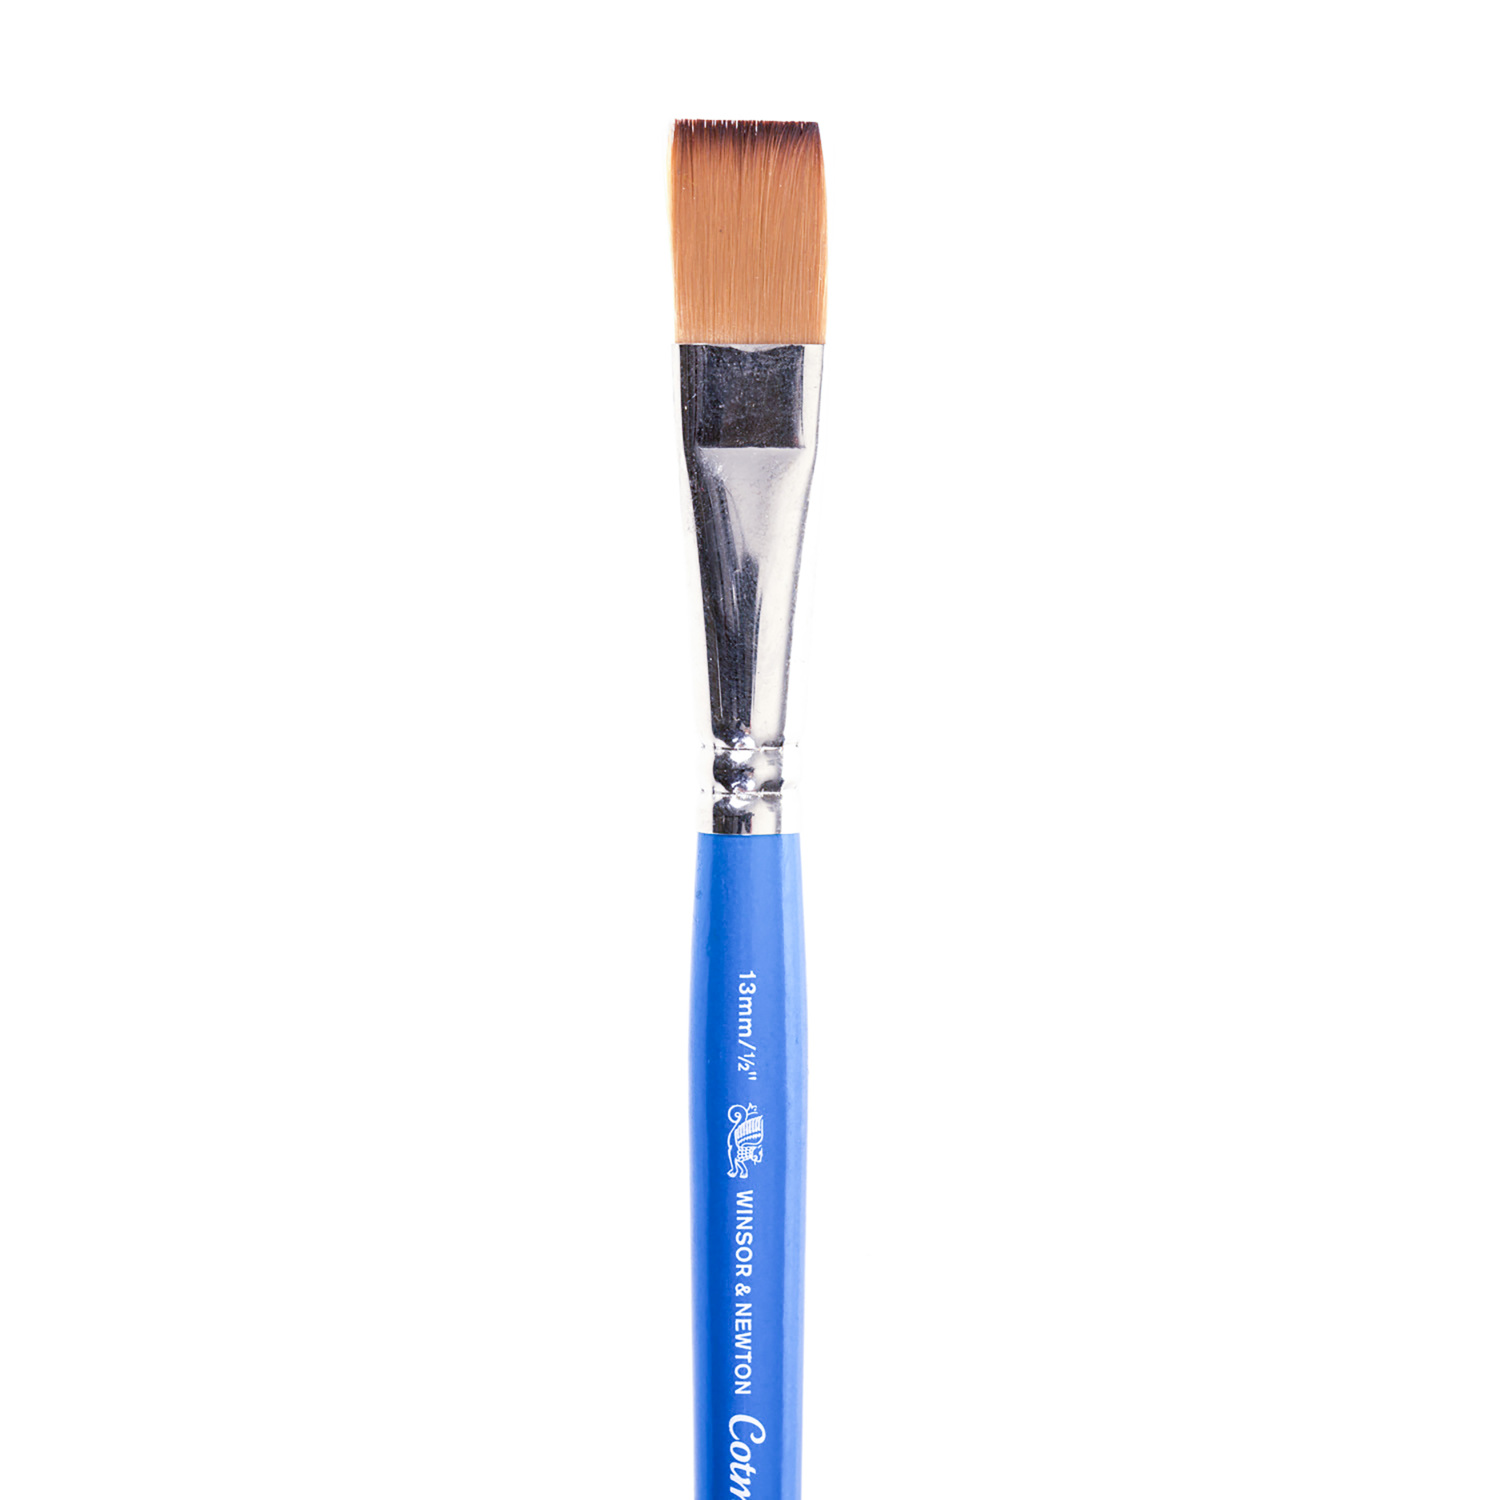 Winsor and Newton Series 666 Cotman One Stroke Watercolour Brushes - 1/2 in (13 mm) Image 1